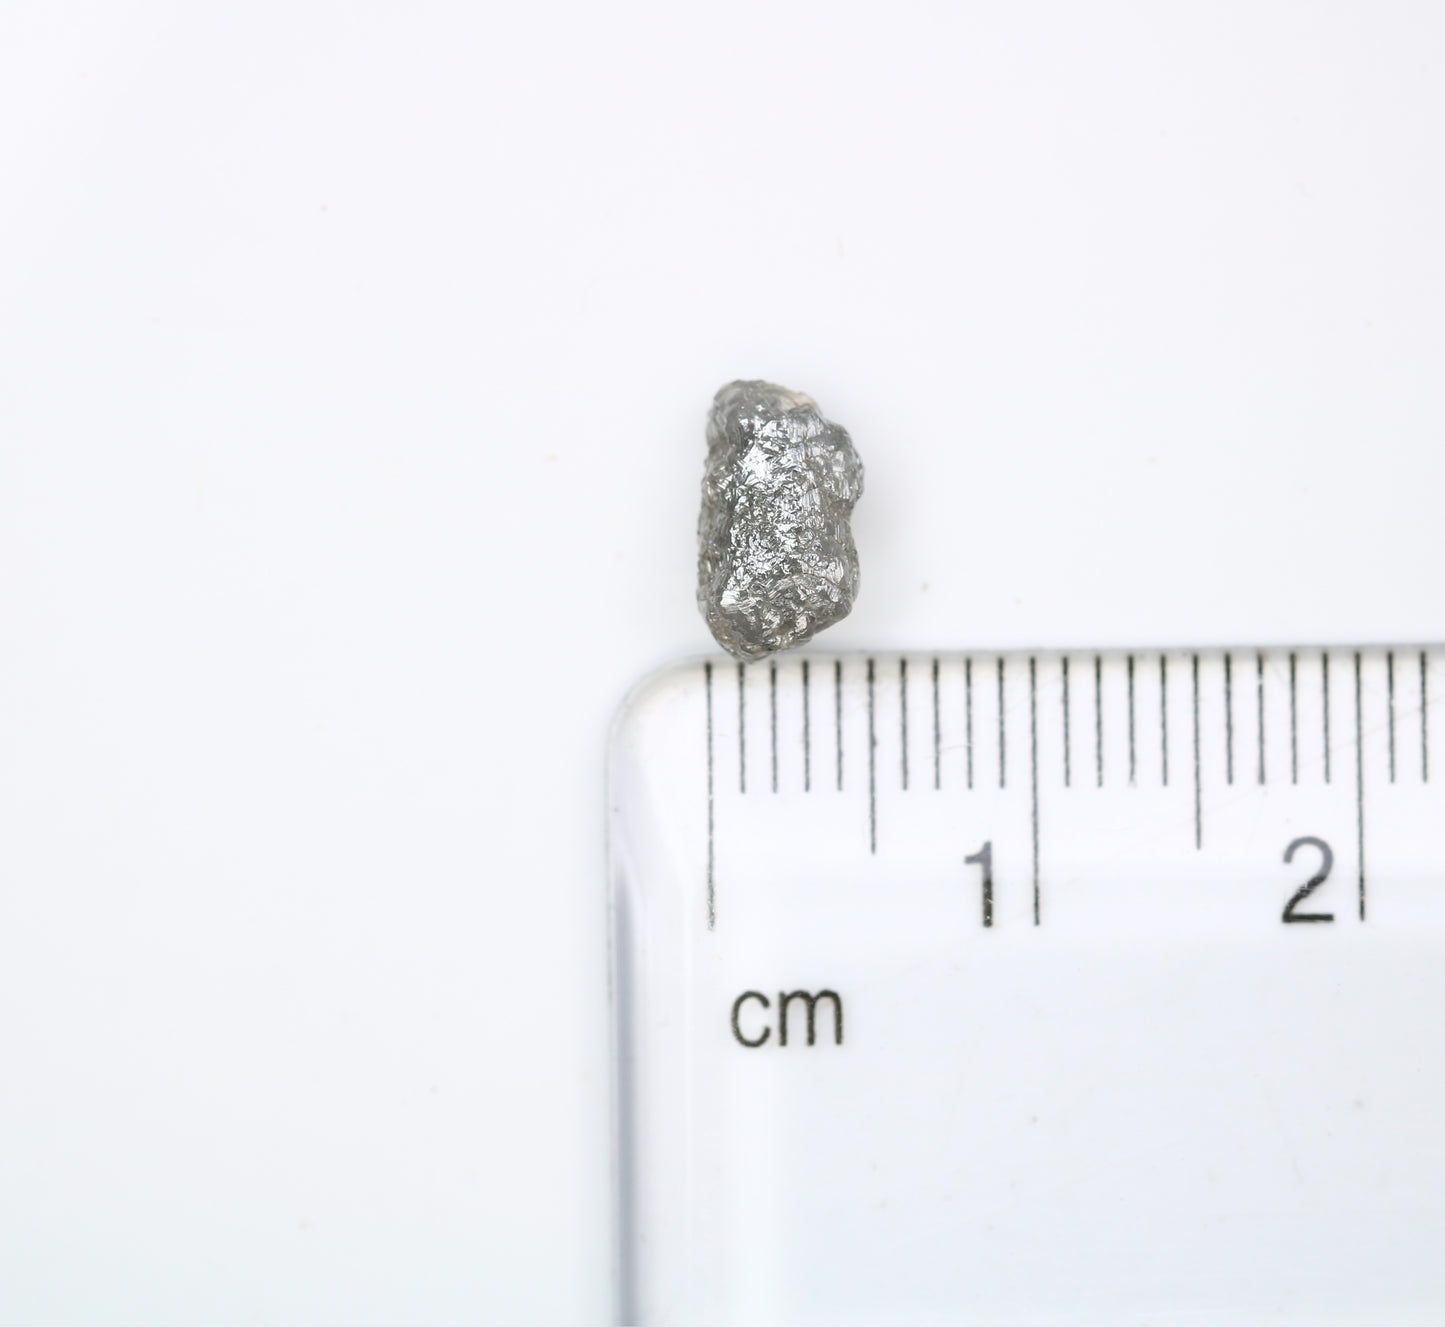 1.63 CT Raw Rough Grey Natural 8.70 x 5.30 MM Uncut Diamond For Engagement Ring